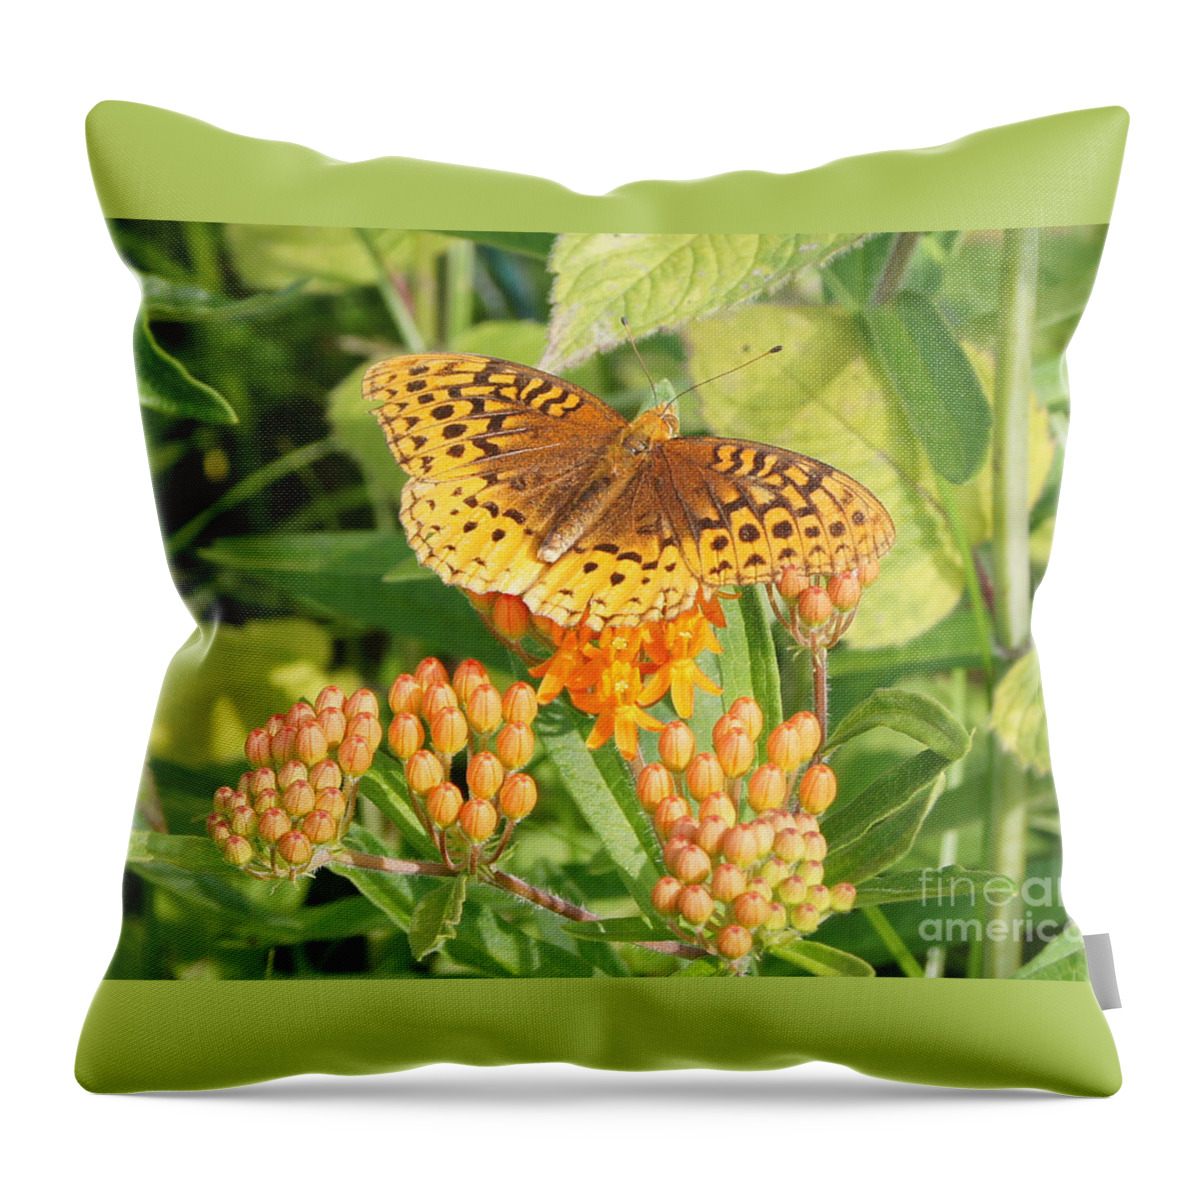 Butterfly Throw Pillow featuring the photograph Great Spangled Fritillary on Butterfly Weed by Robert E Alter Reflections of Infinity